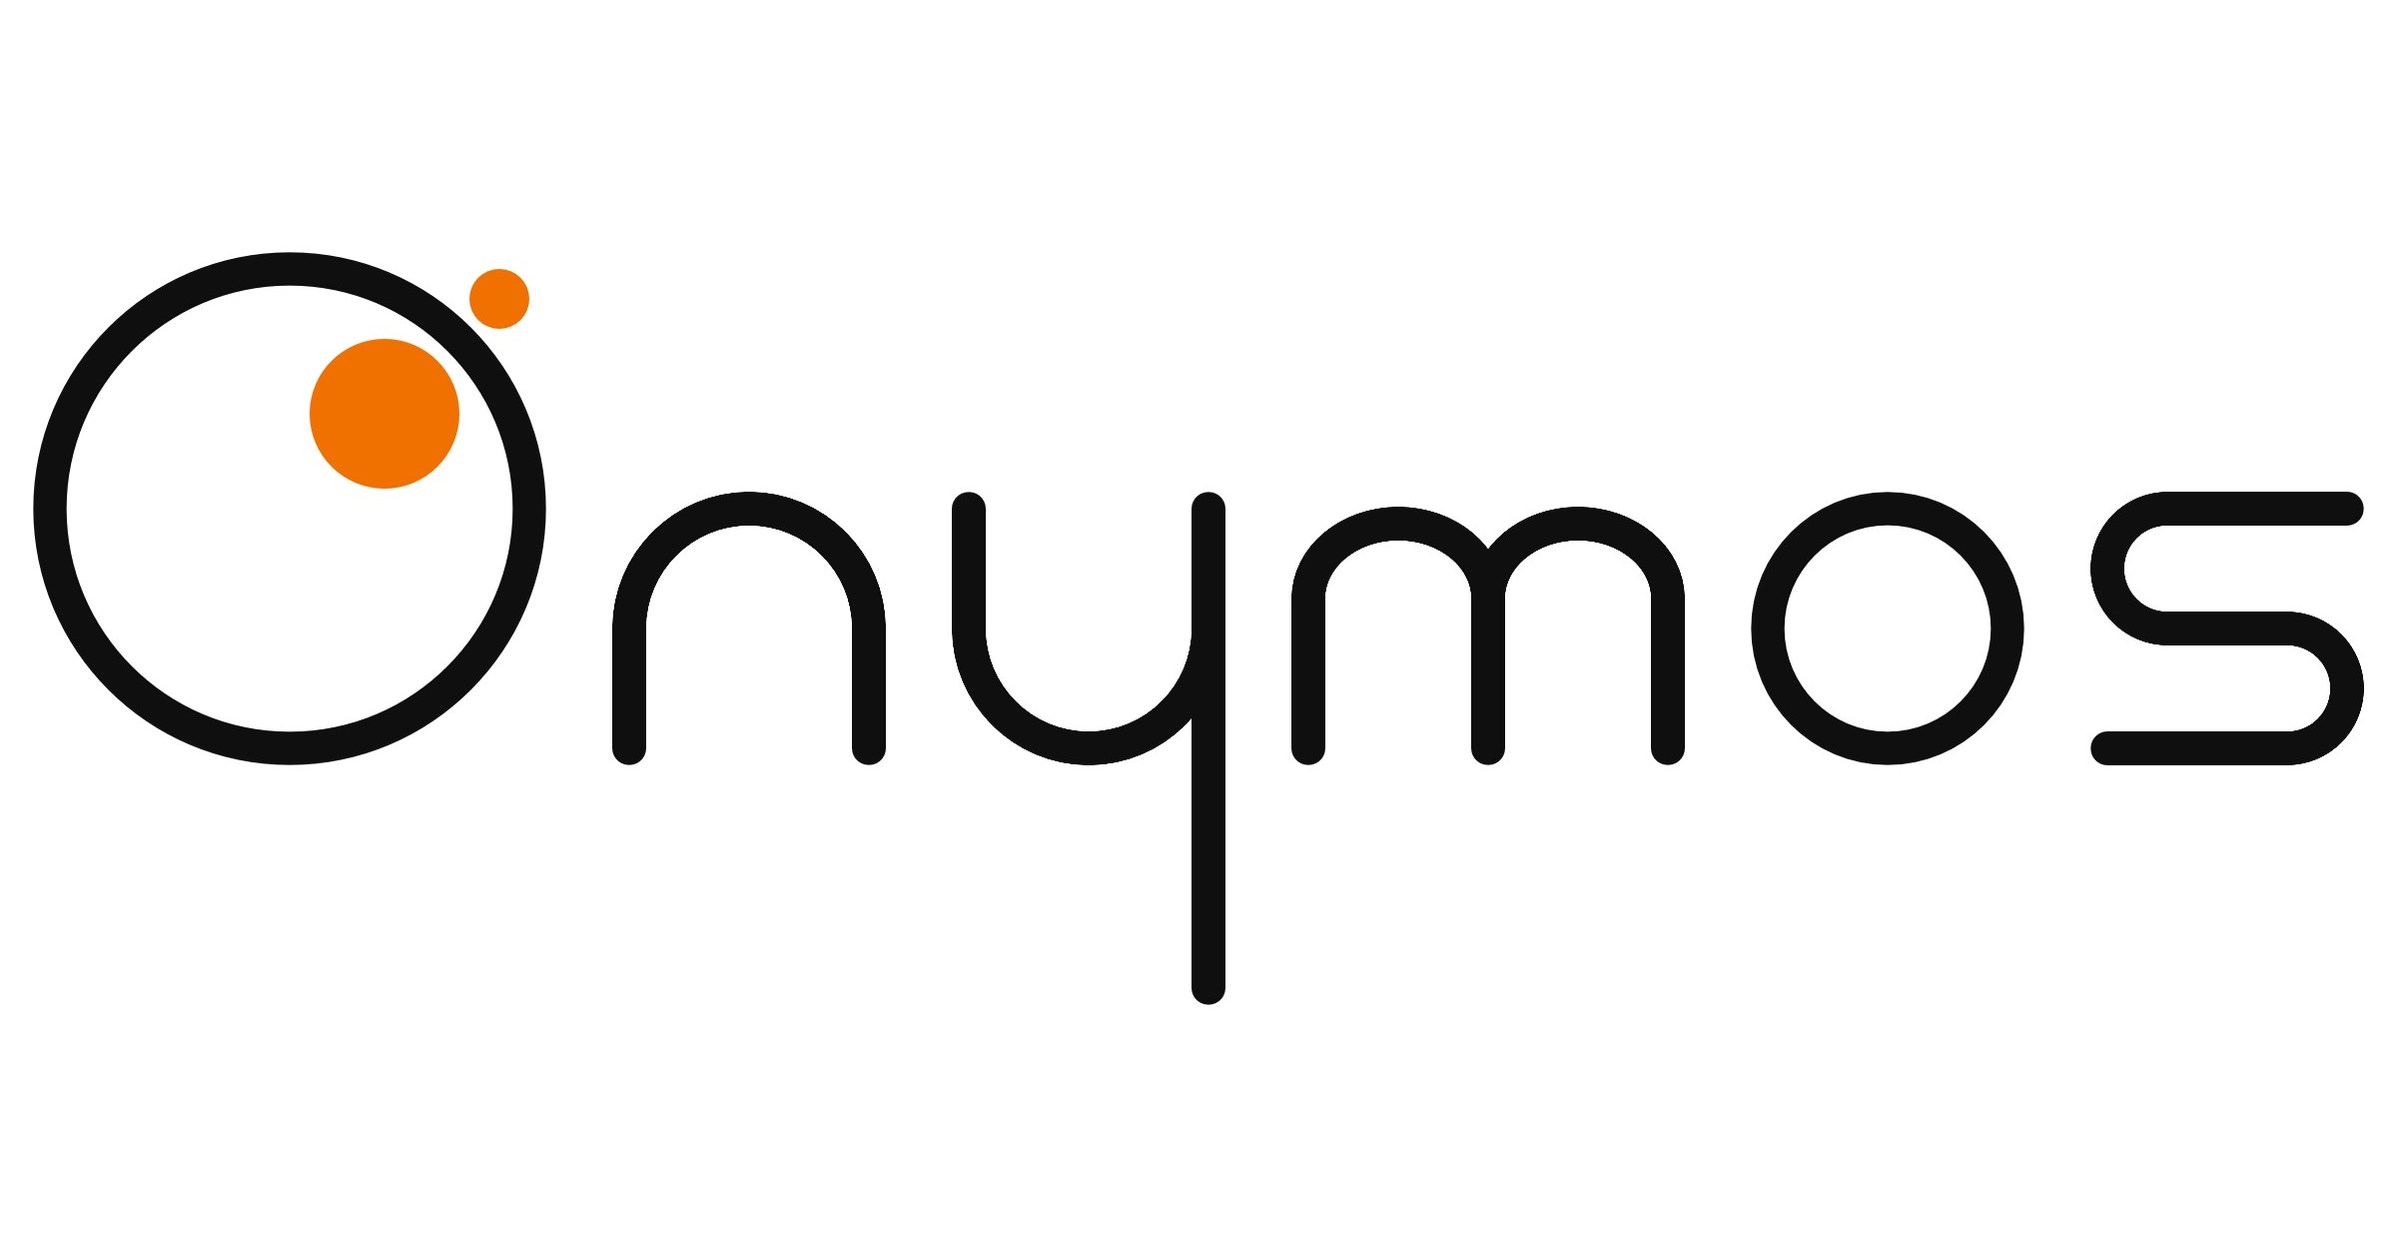 Onymos Secures $12M Series A Financing to Expand World's First Features-as-a-Service Platform